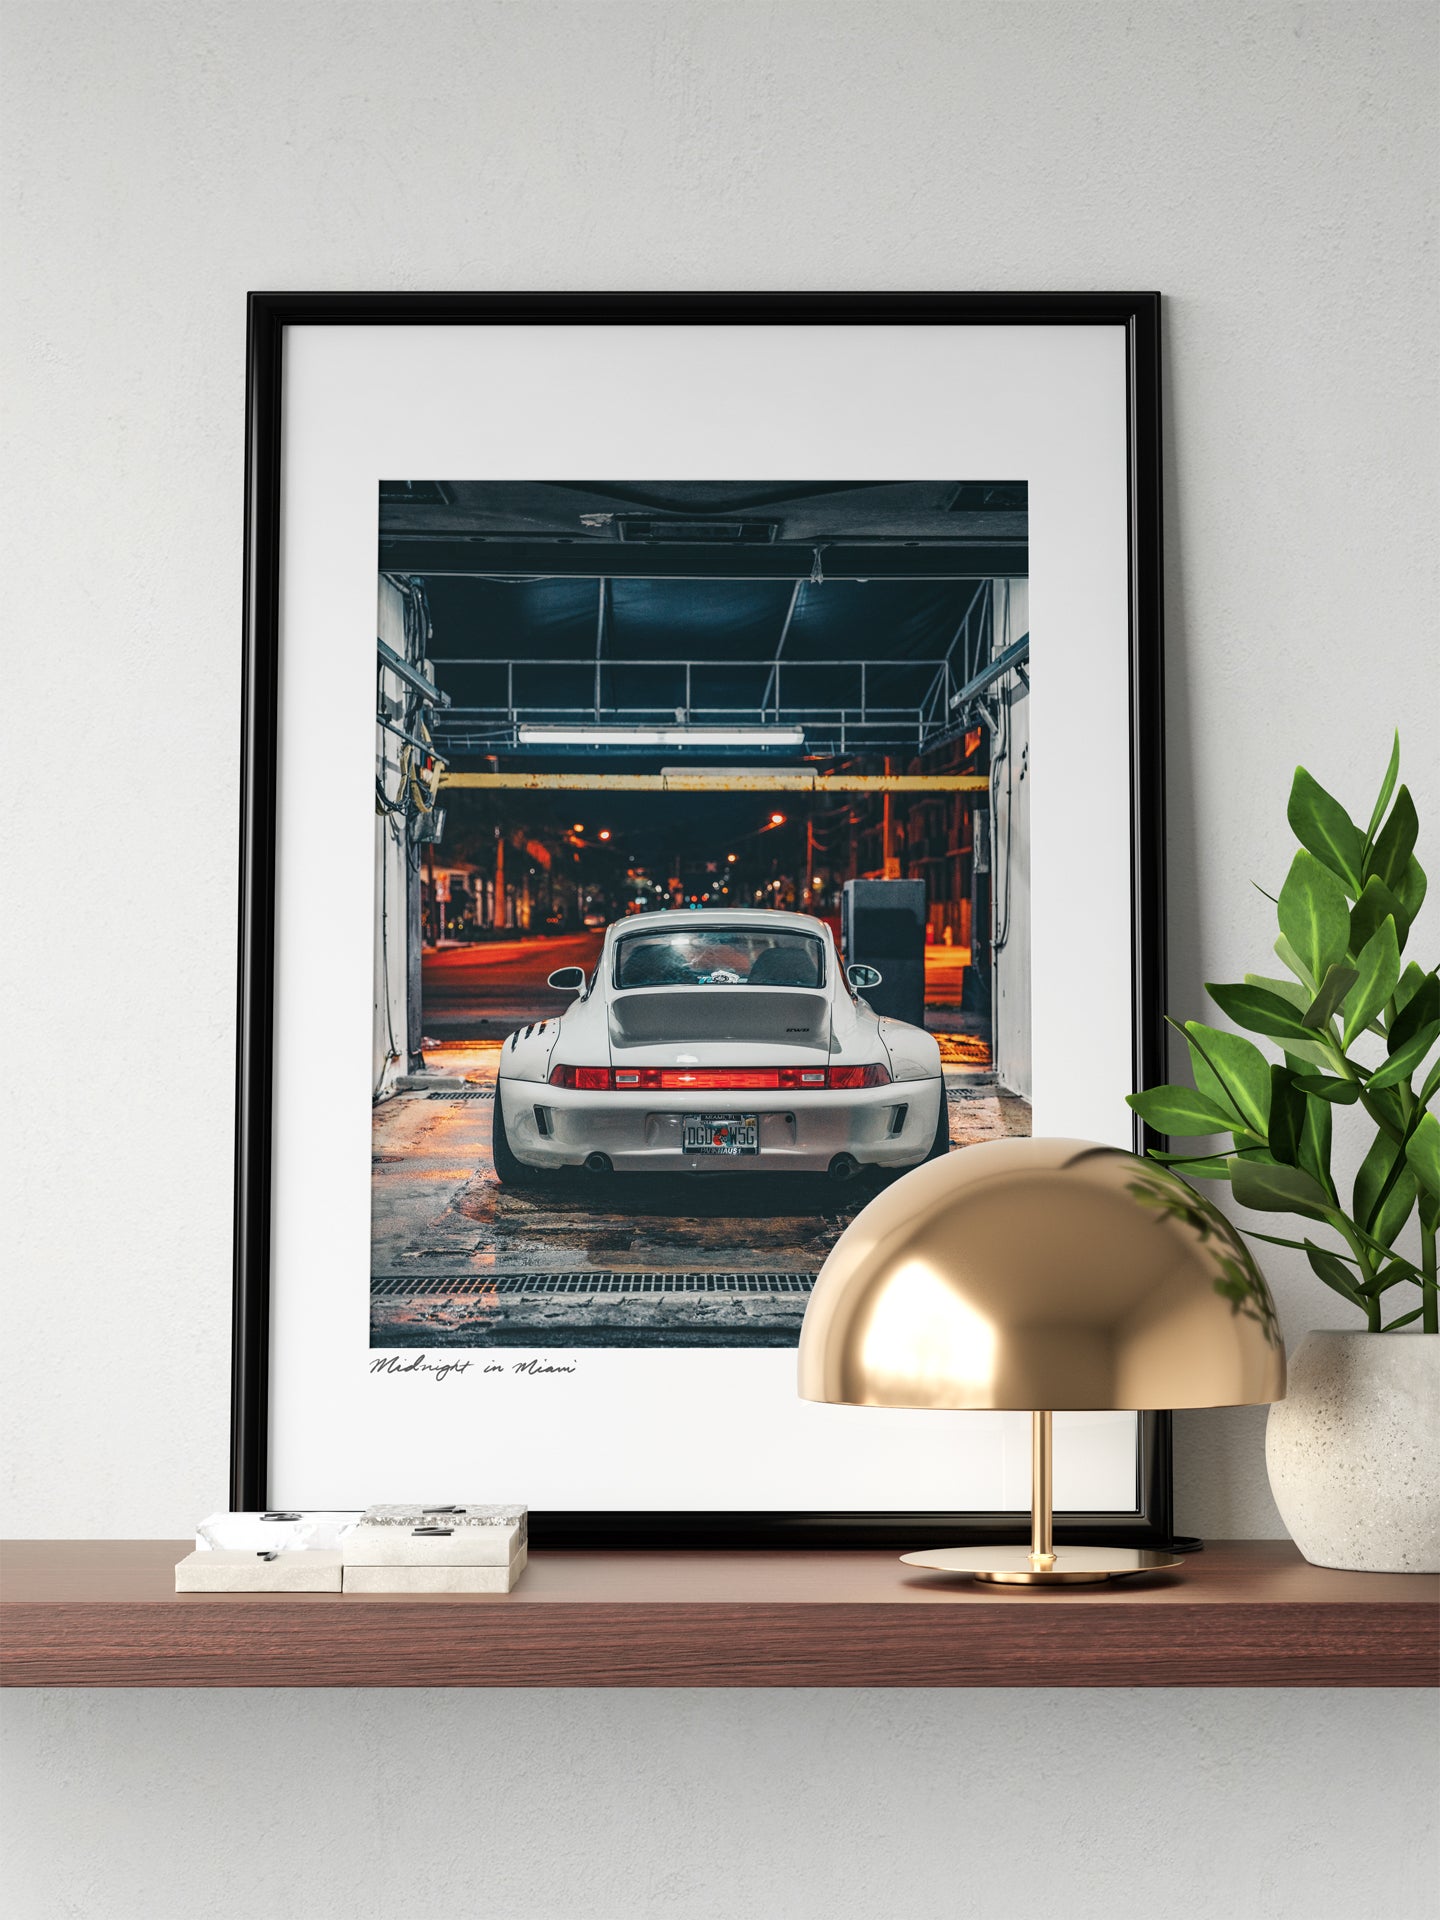 #005 Signature Series Limited Poster - "Midnight in Miami"